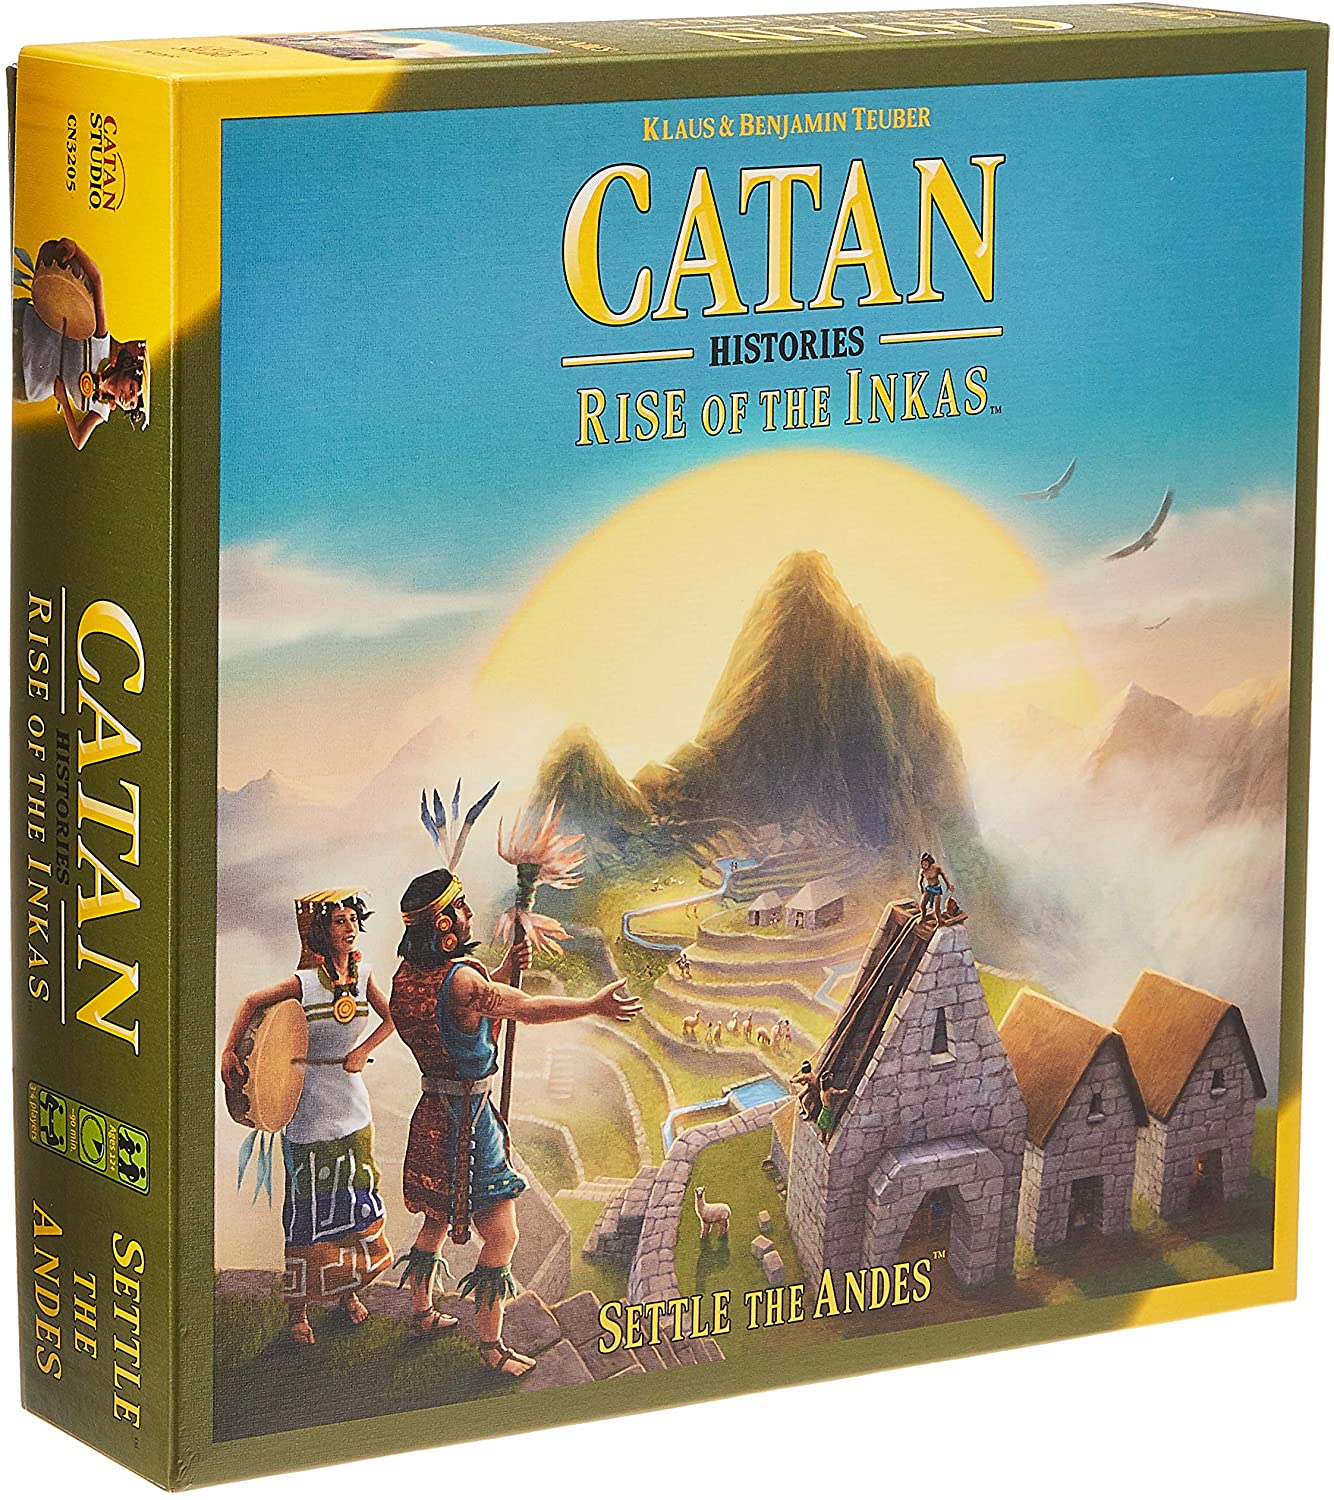 Catan: Rise of the Inkas (stand alone)